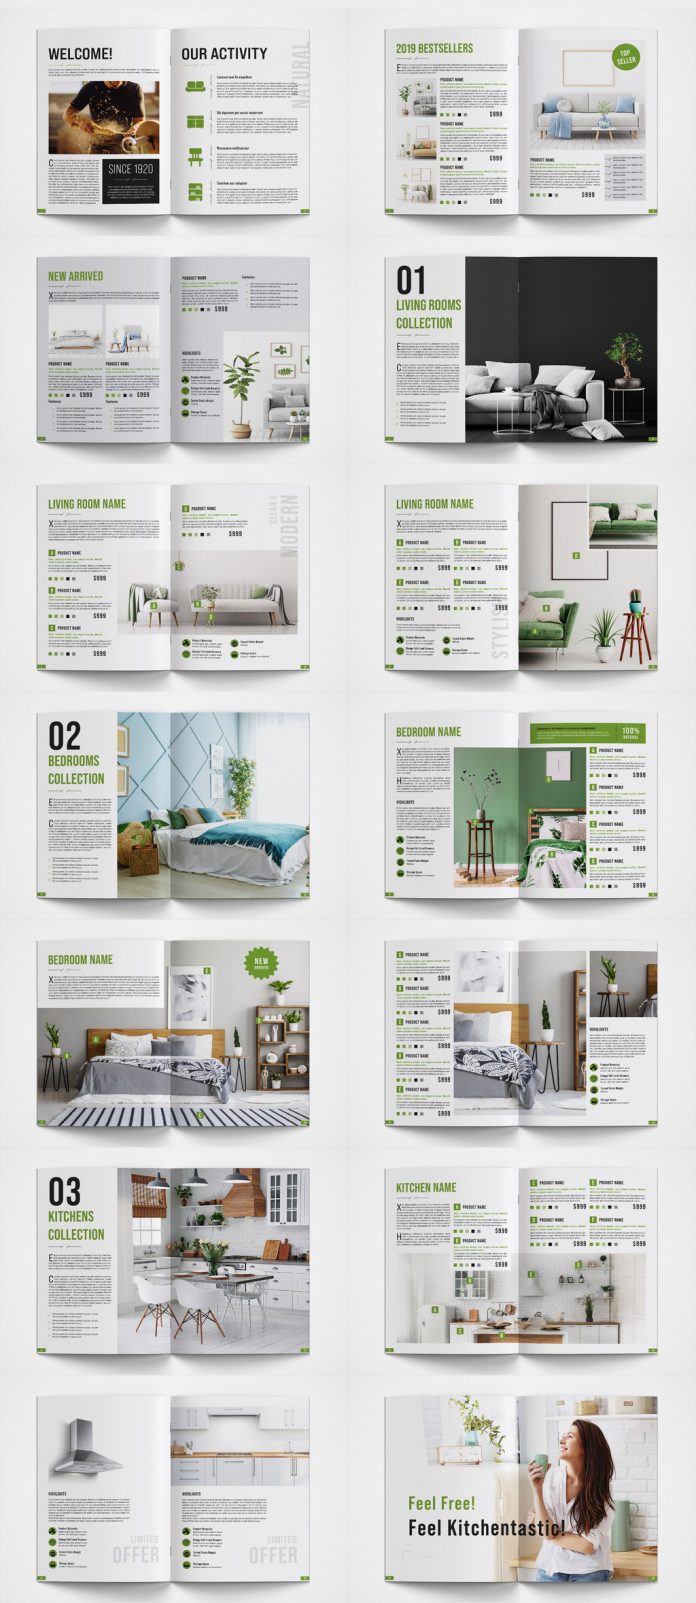 Product catalog template for Adobe InDesign with green accents.